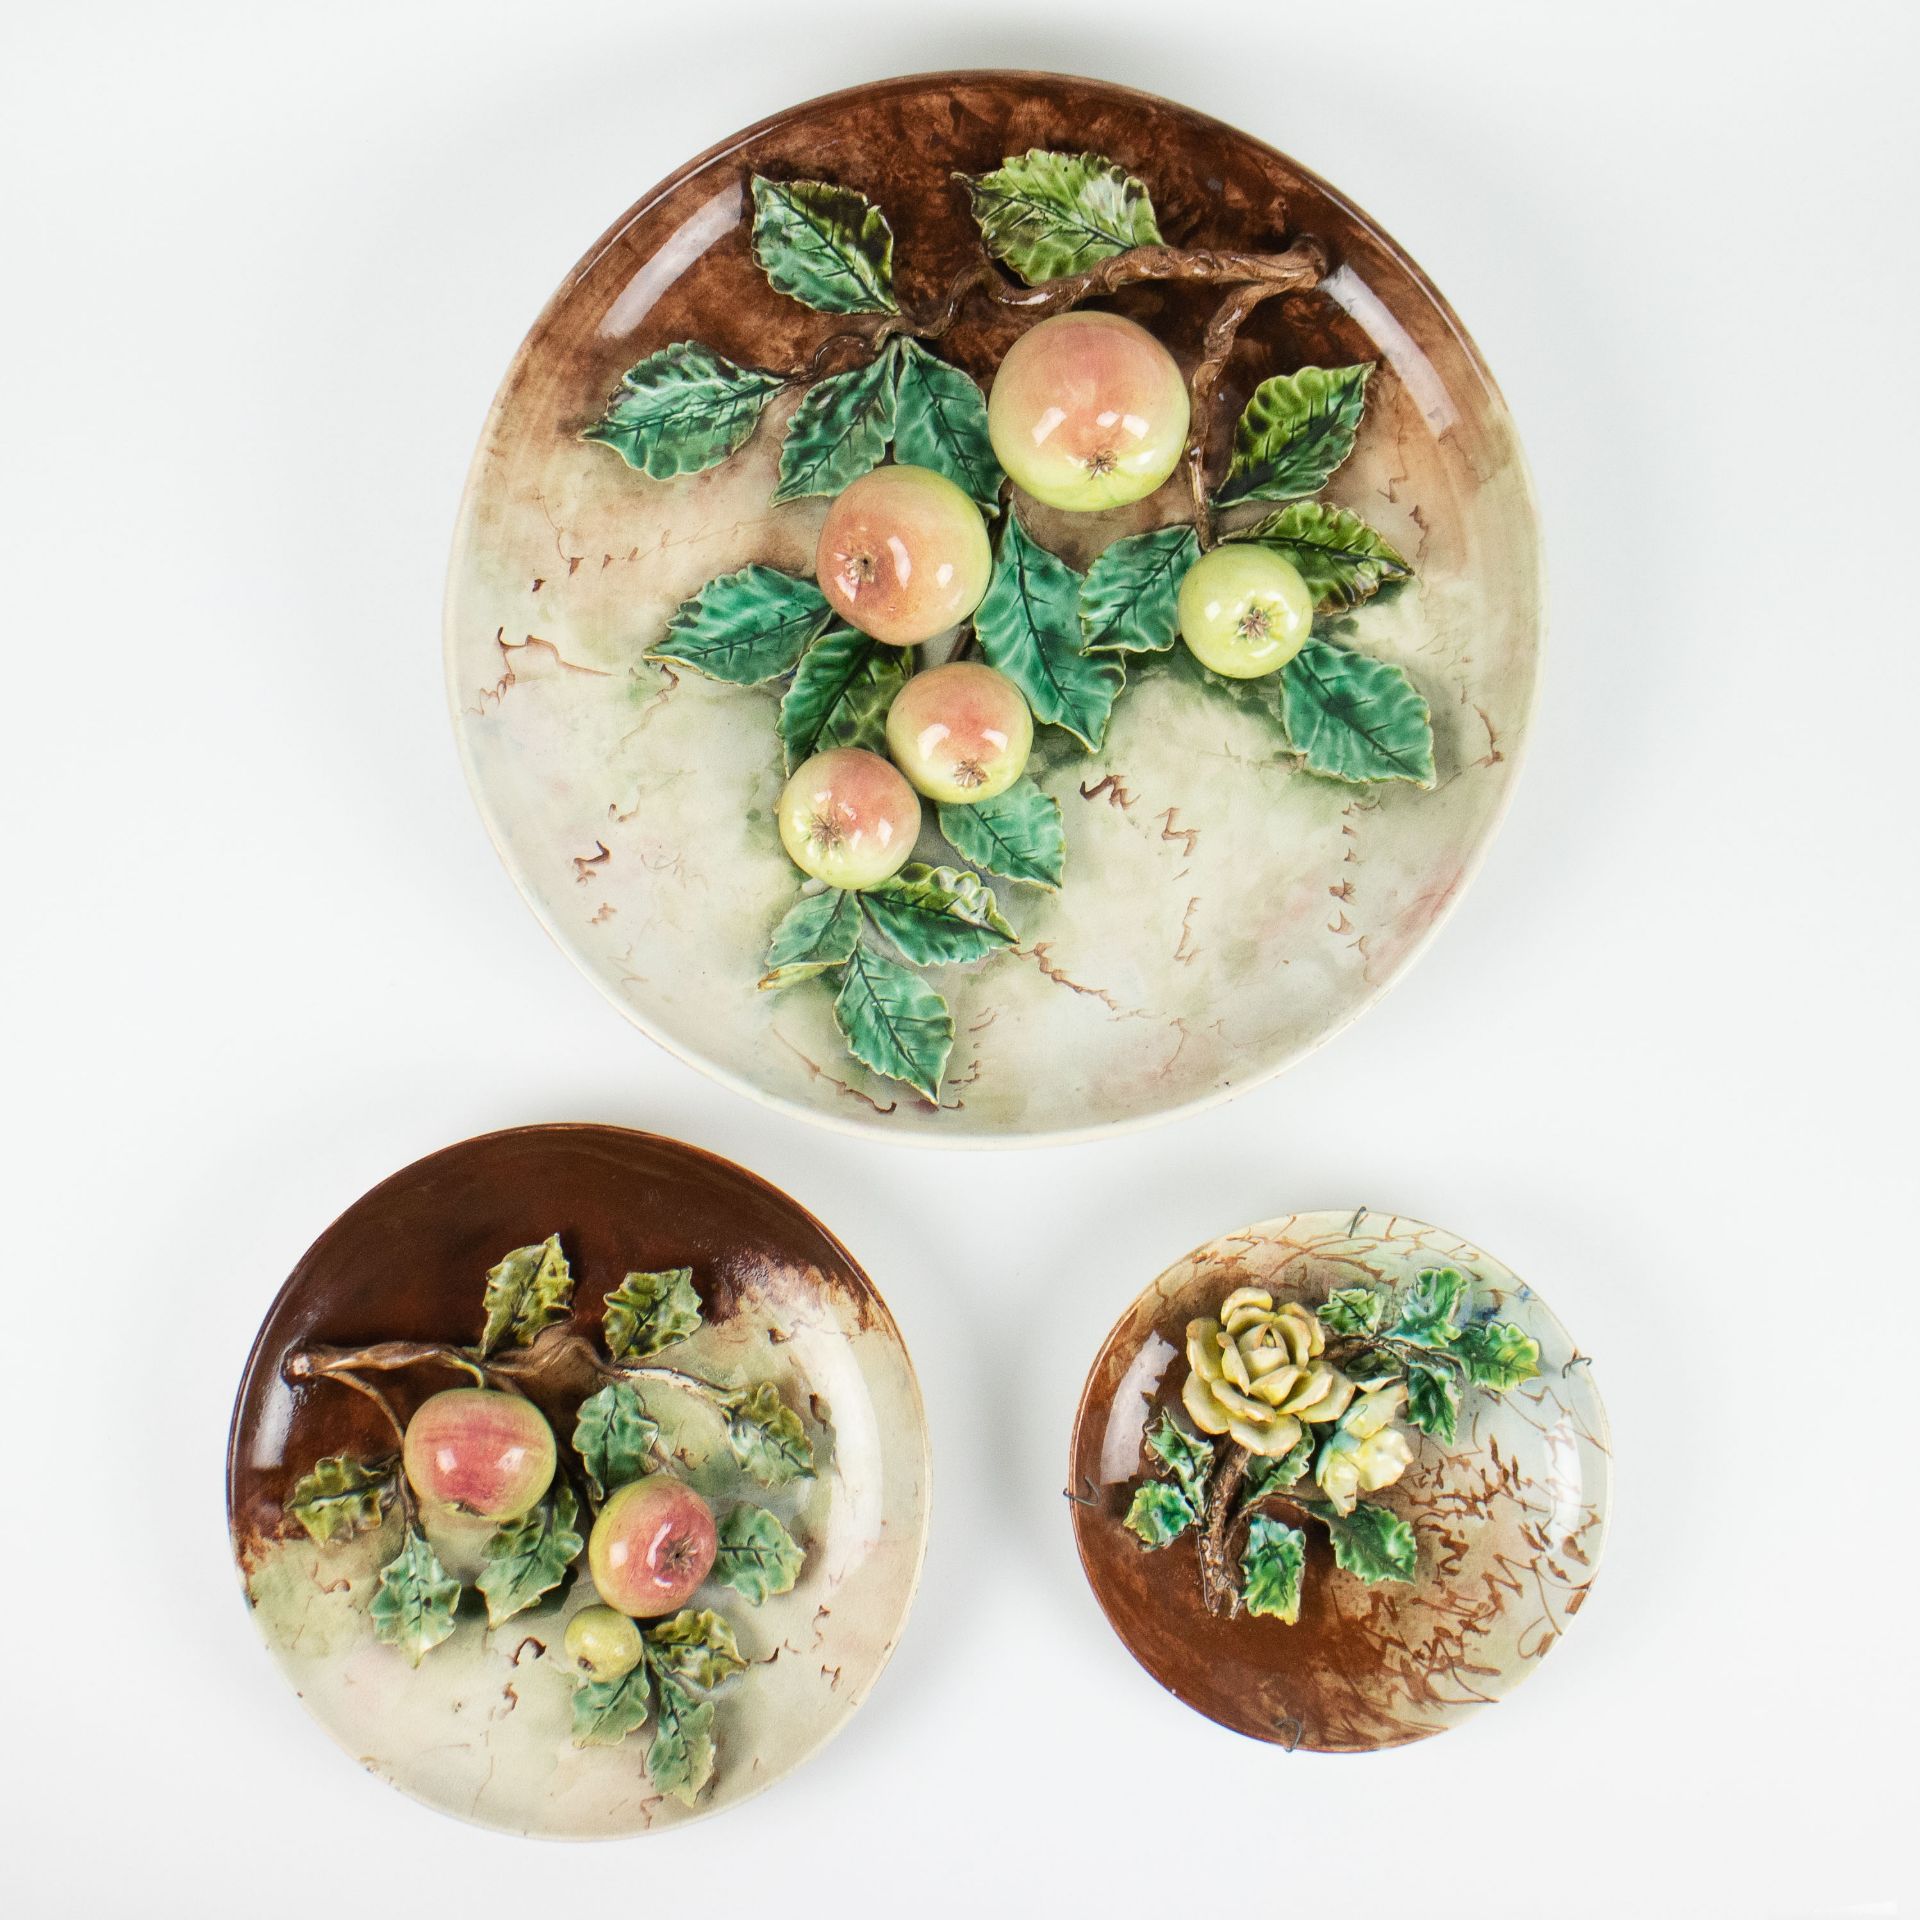 LONGCHAMP: 3 earthenware dishes with decoration apples, leaves and flowers in high relief